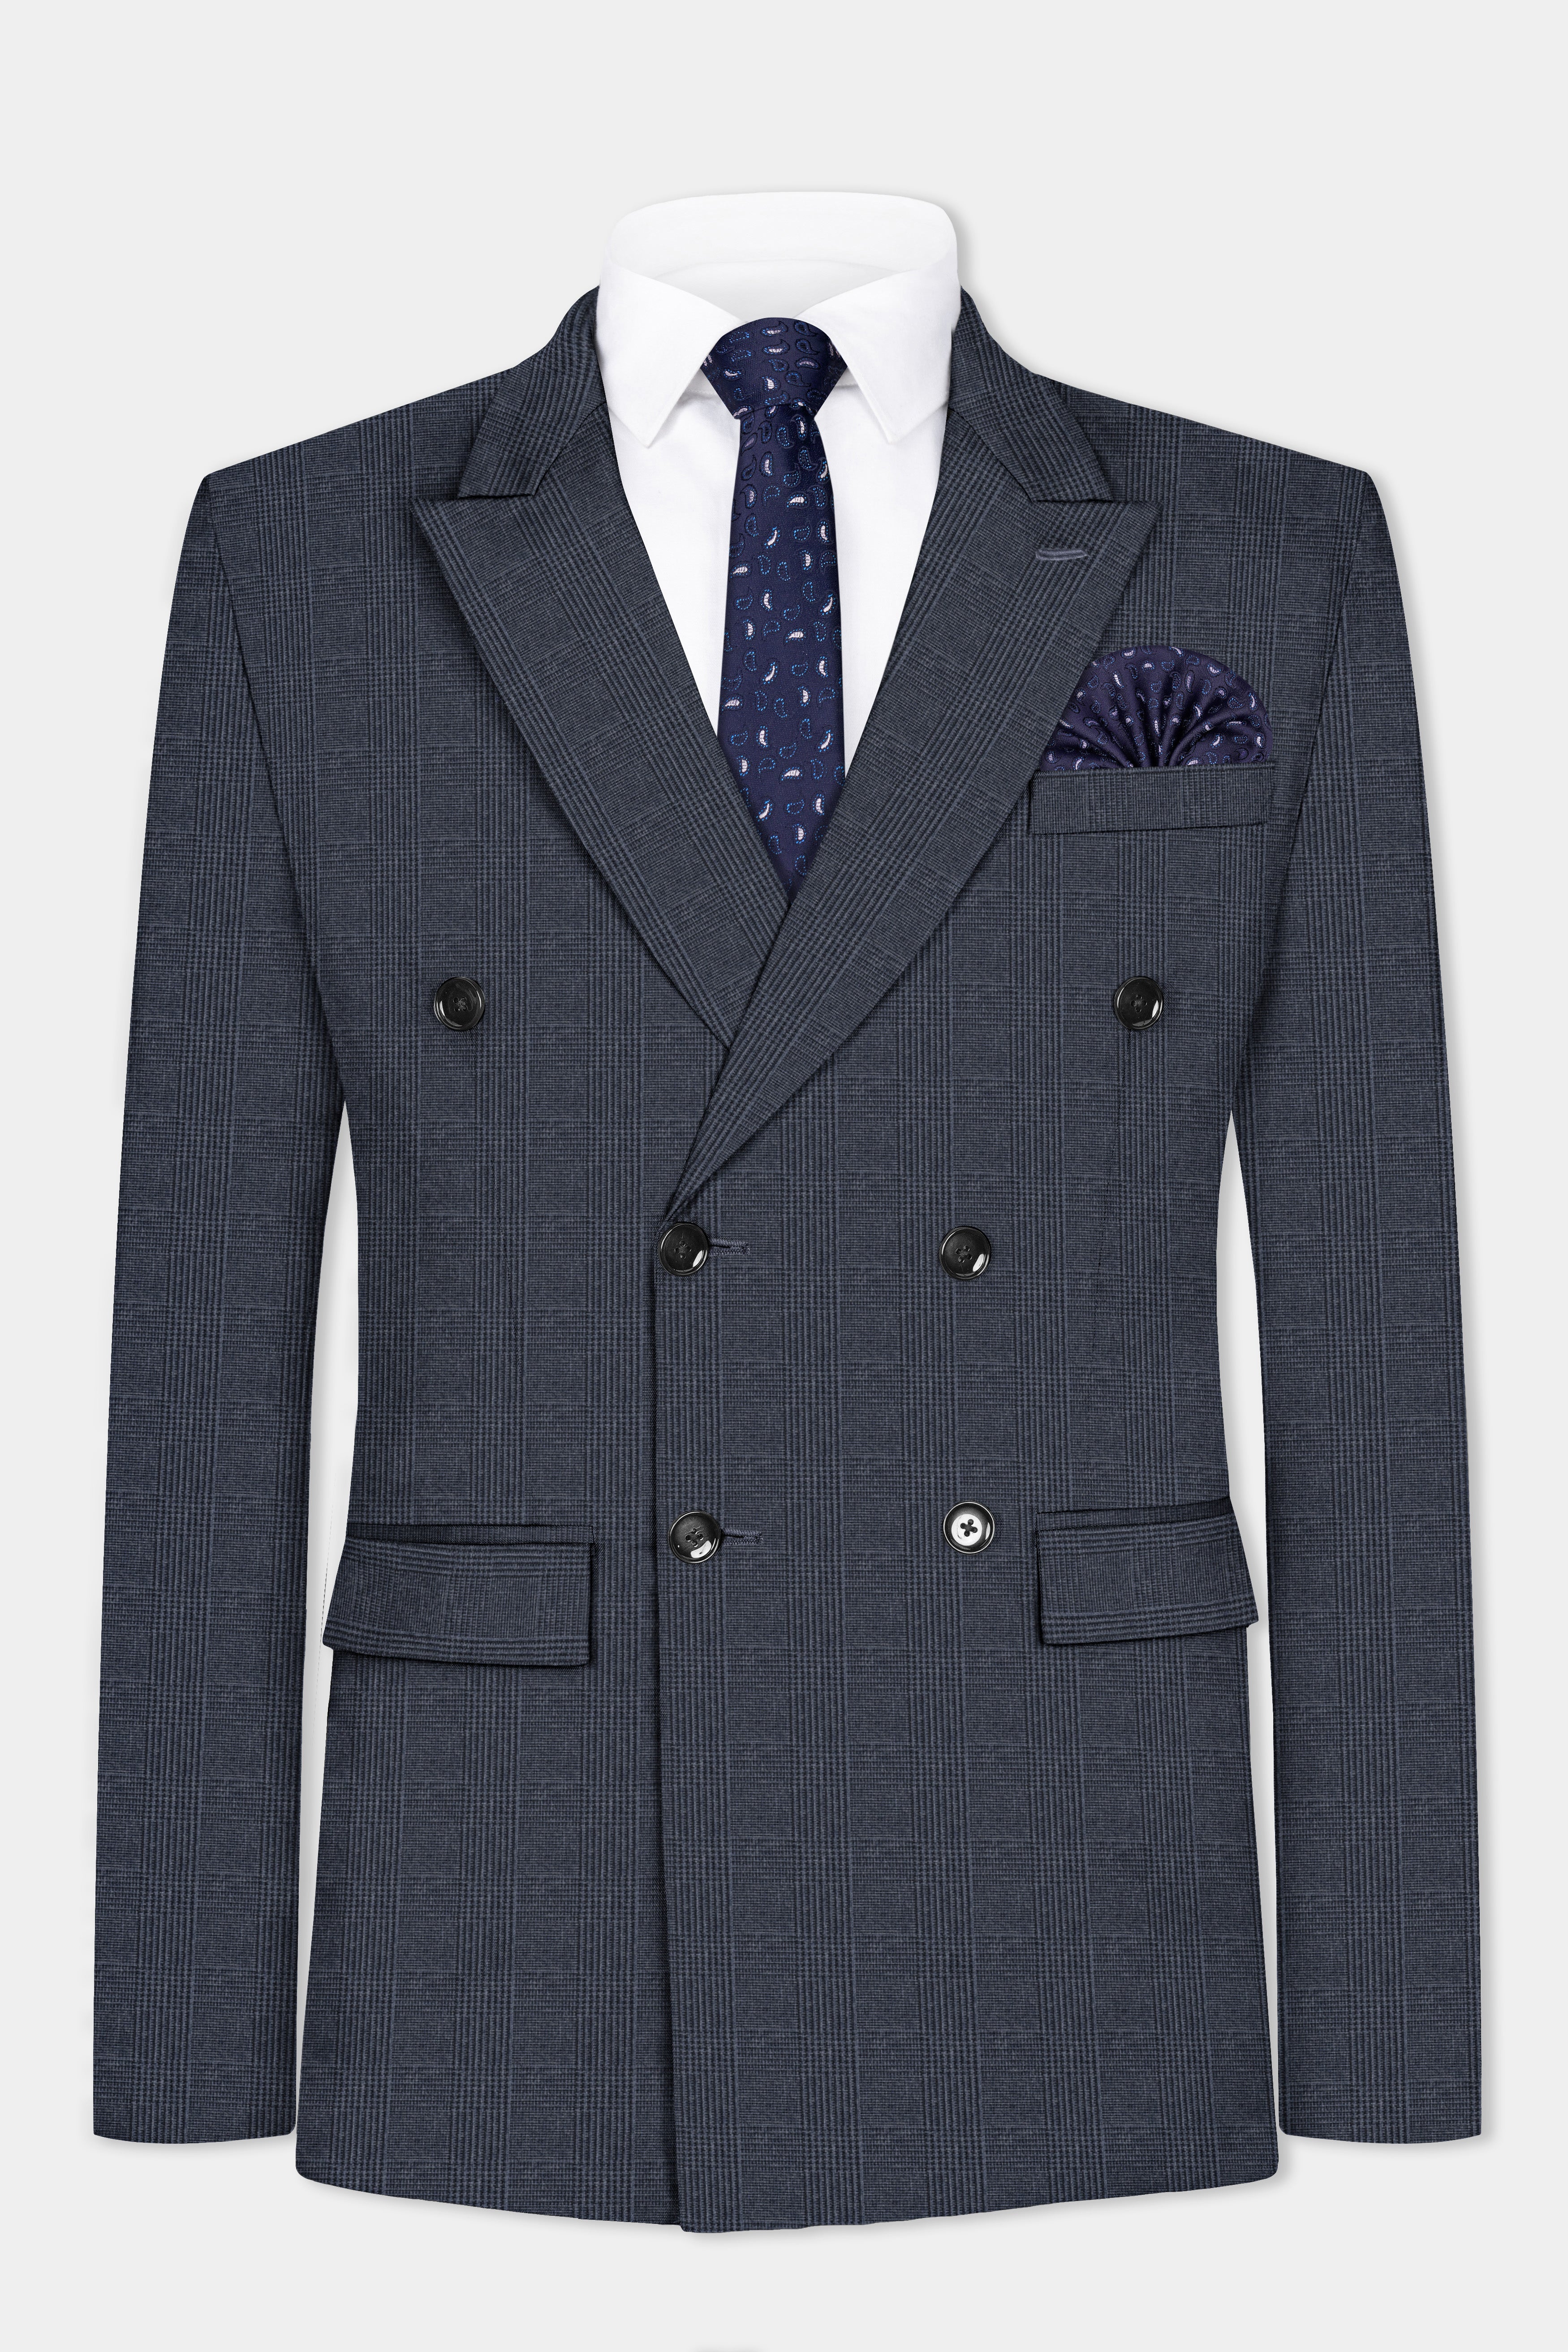 Gun Powder Gray Plaid Wool Blend Double Breasted Suit